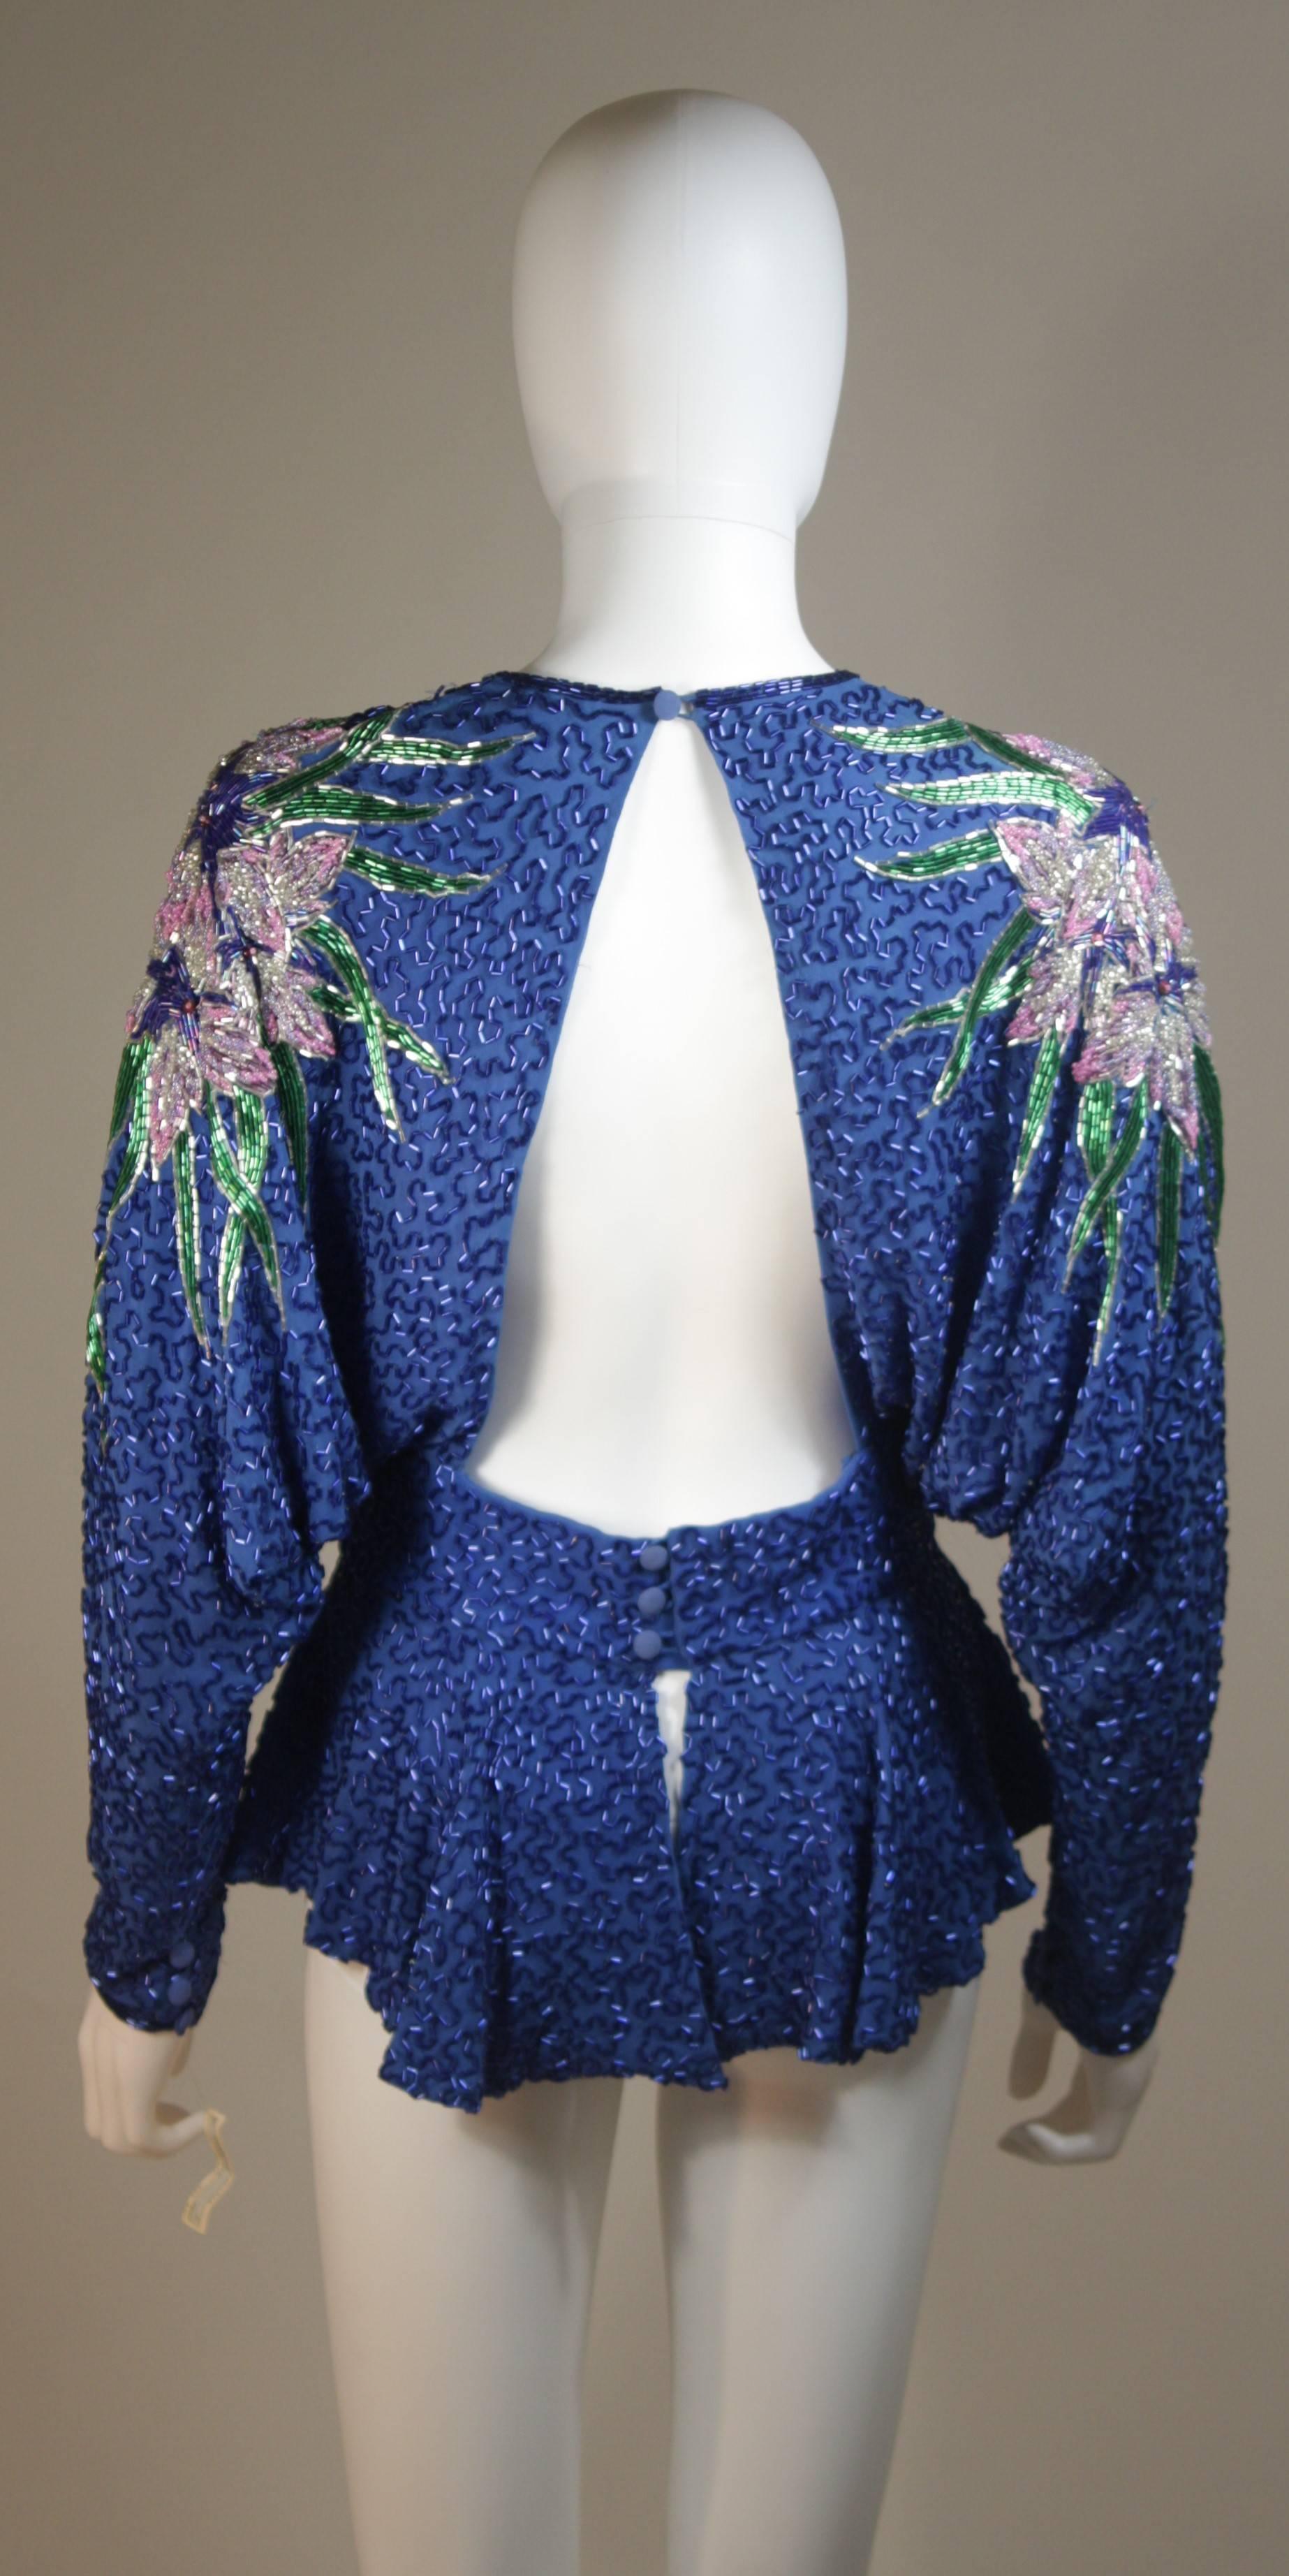 STEPHEN YEARIK Beaded Blouse with Open Back and Floral Motif Size 4-6 For Sale 3